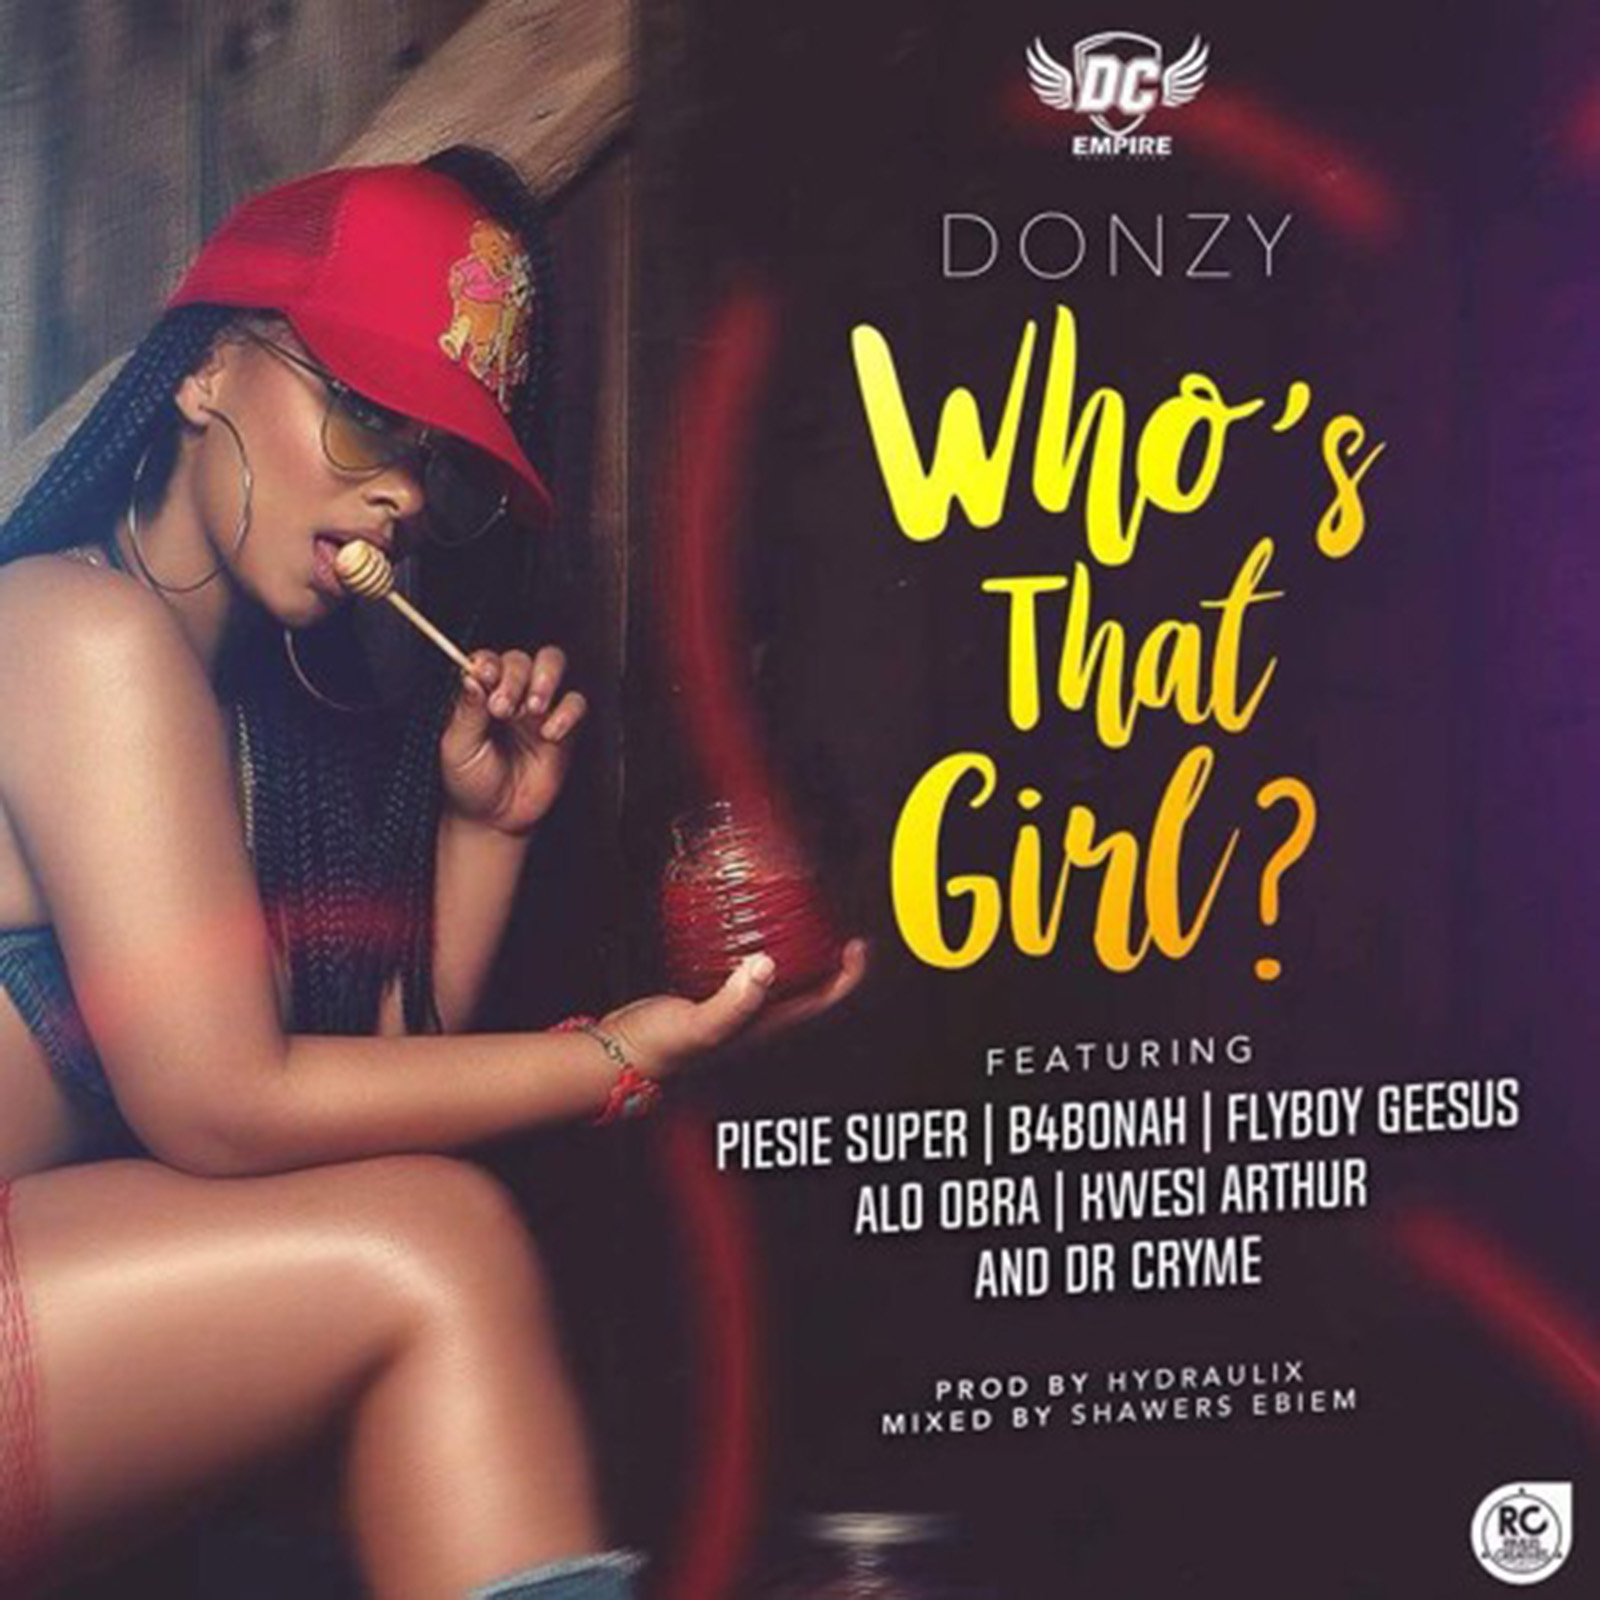 Who's That Girl by Donzy feat. Piesie, B4Bonah, Flyboy, Obra, Kwesi Arthur & Dr. Cryme